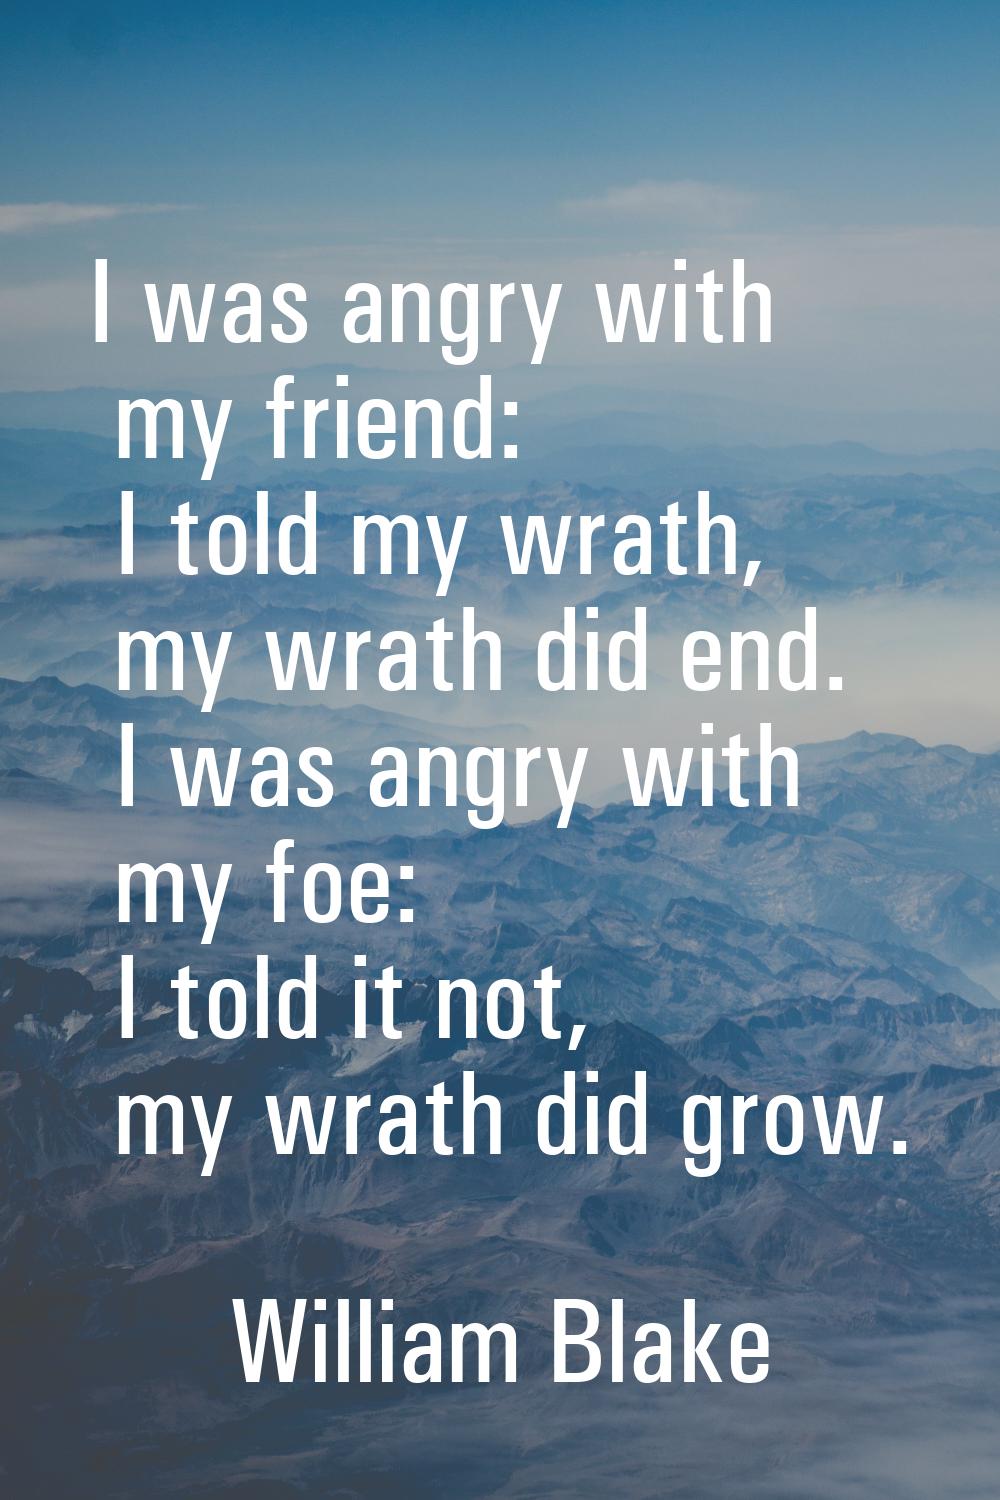 I was angry with my friend: I told my wrath, my wrath did end. I was angry with my foe: I told it n